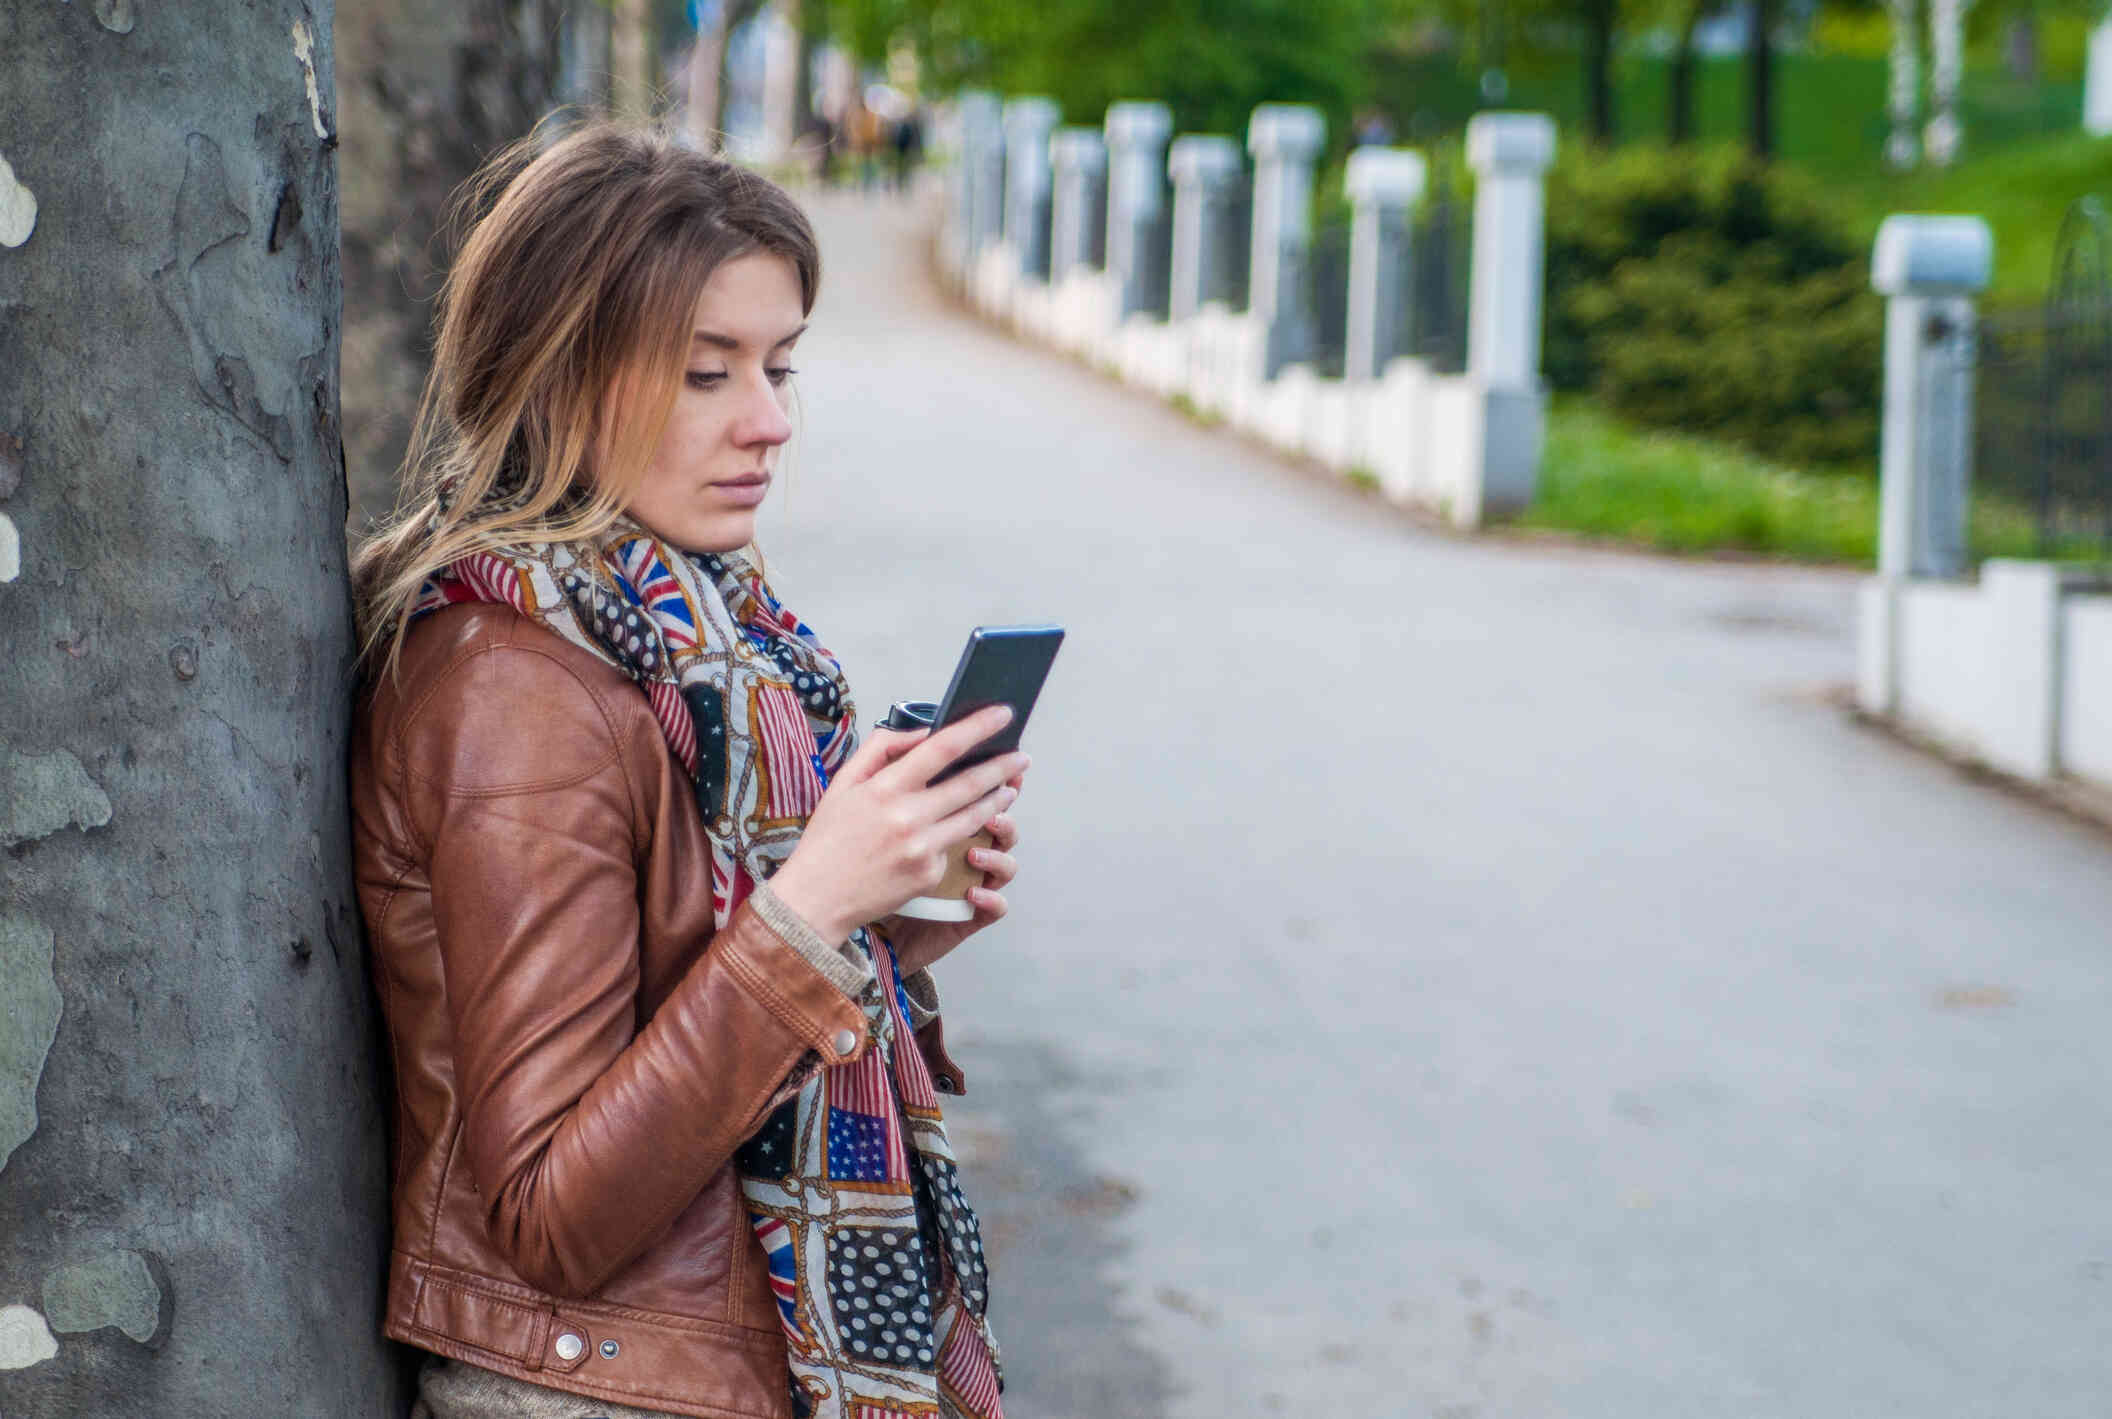 A woman in a brown leather jacket stands outside with a to go cup of coffee and looks at the cellphone in her hand.